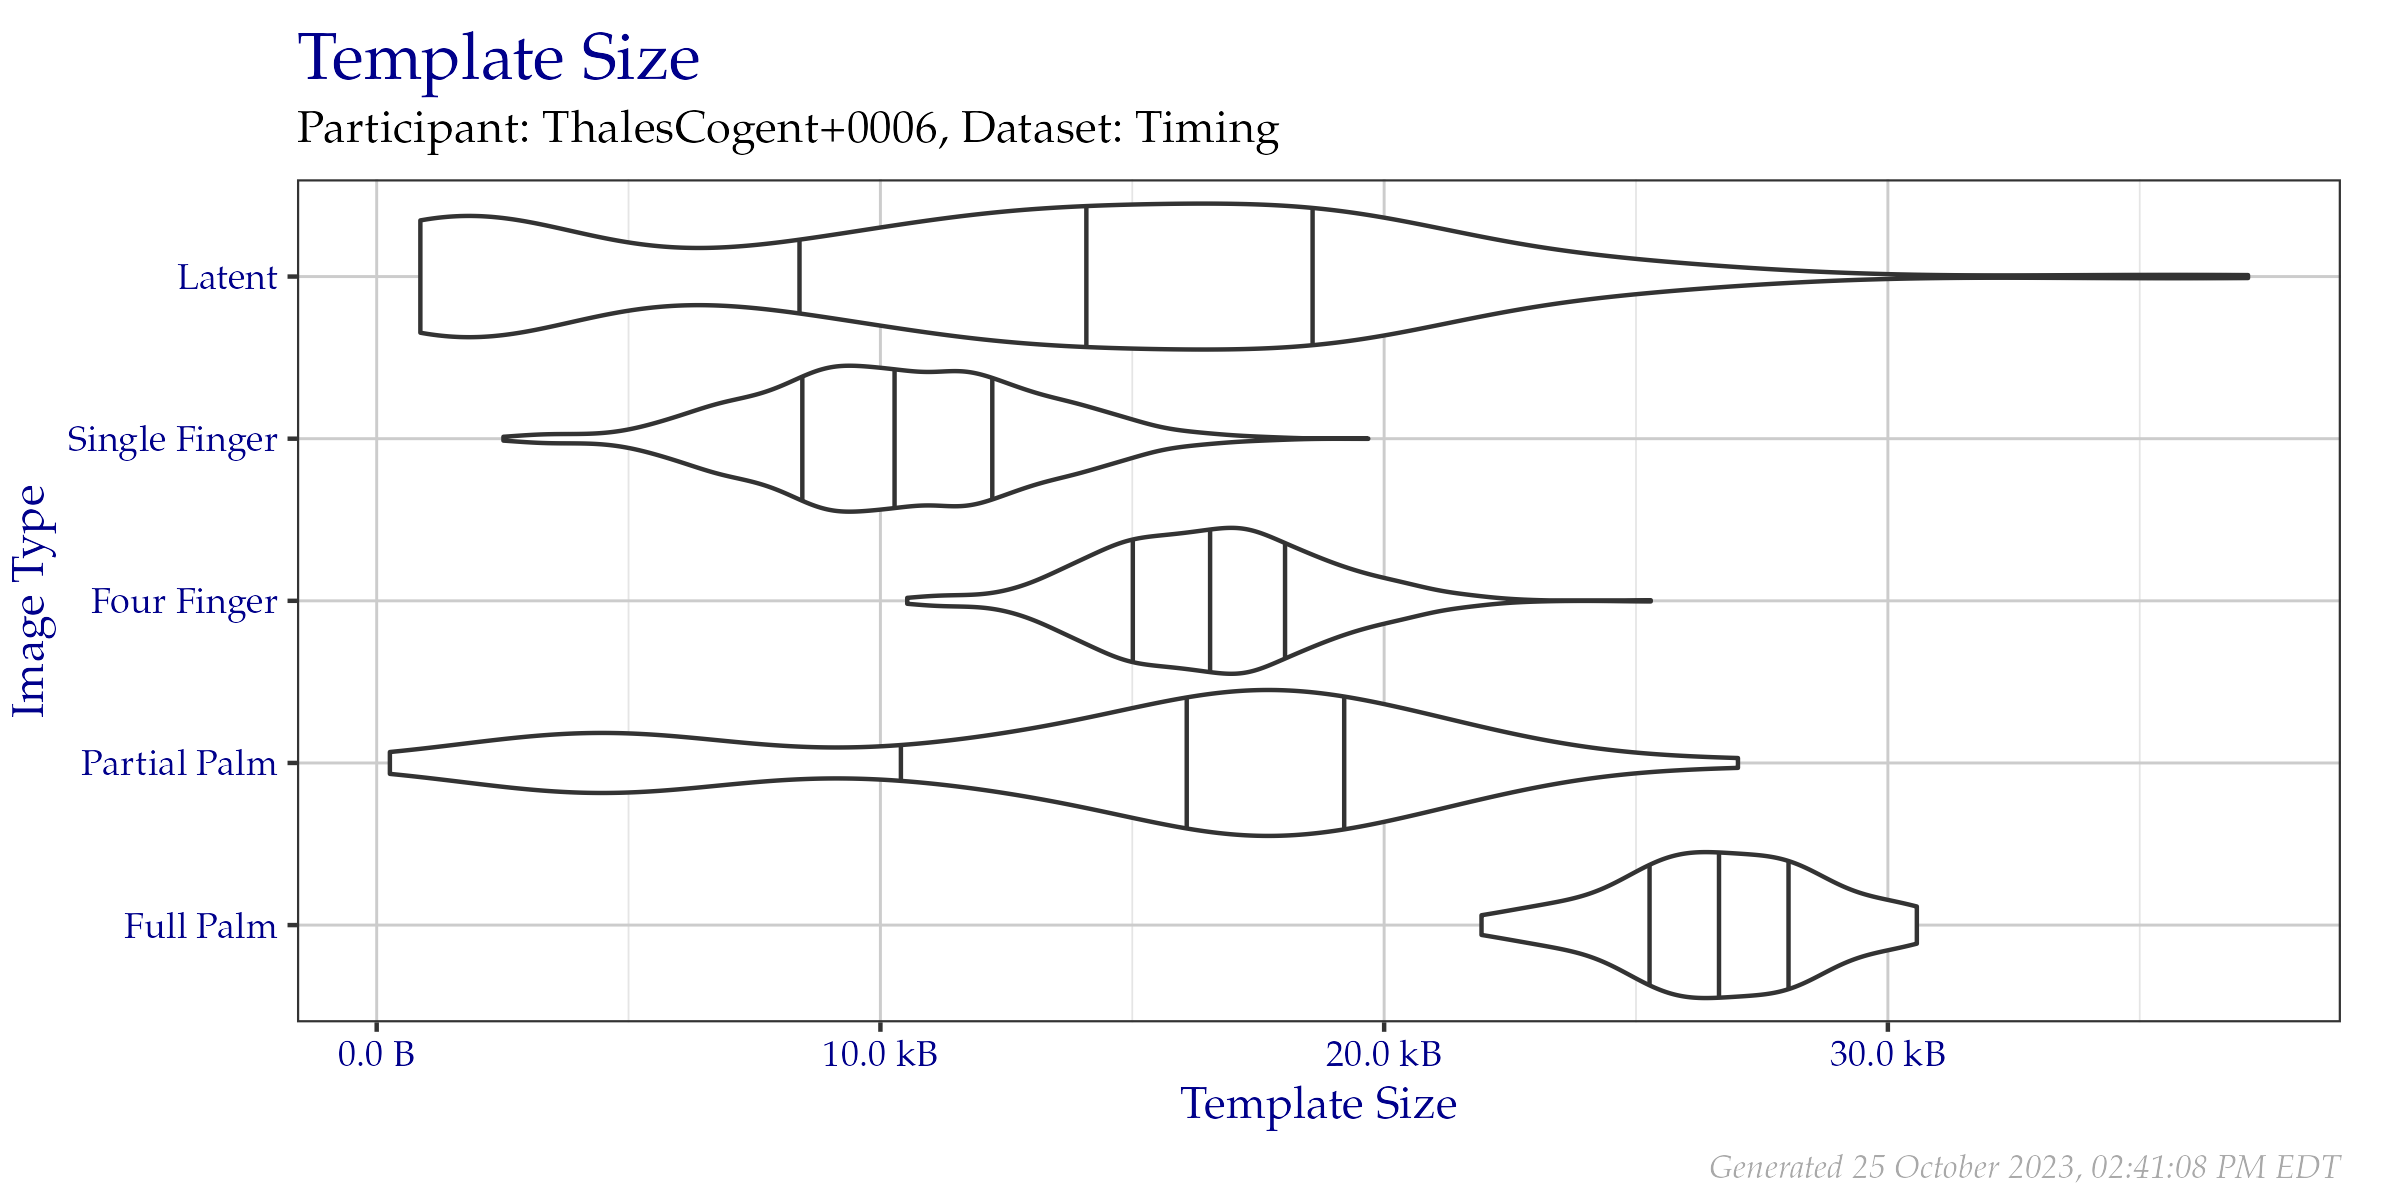 Violin plot of template file sizes as seen on the  Timing Sample dataset. Vertical lines from left to right indicate the 25\%, 50\%, and 75\% quantiles respectively.